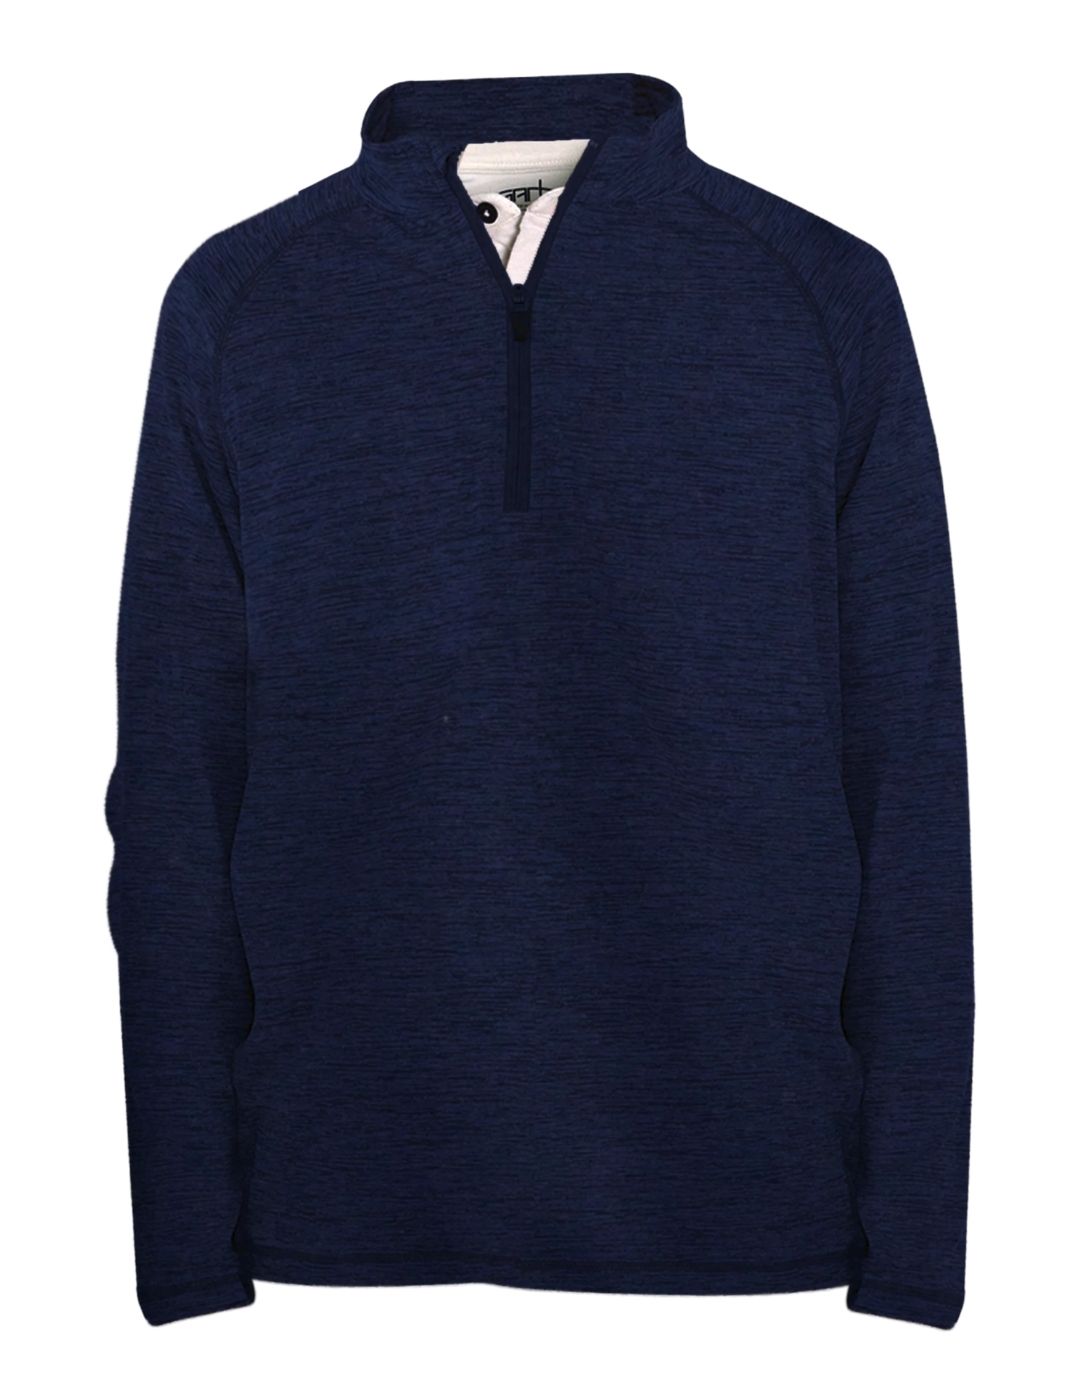 Matthew Youth & Toddler Boys' Pullover